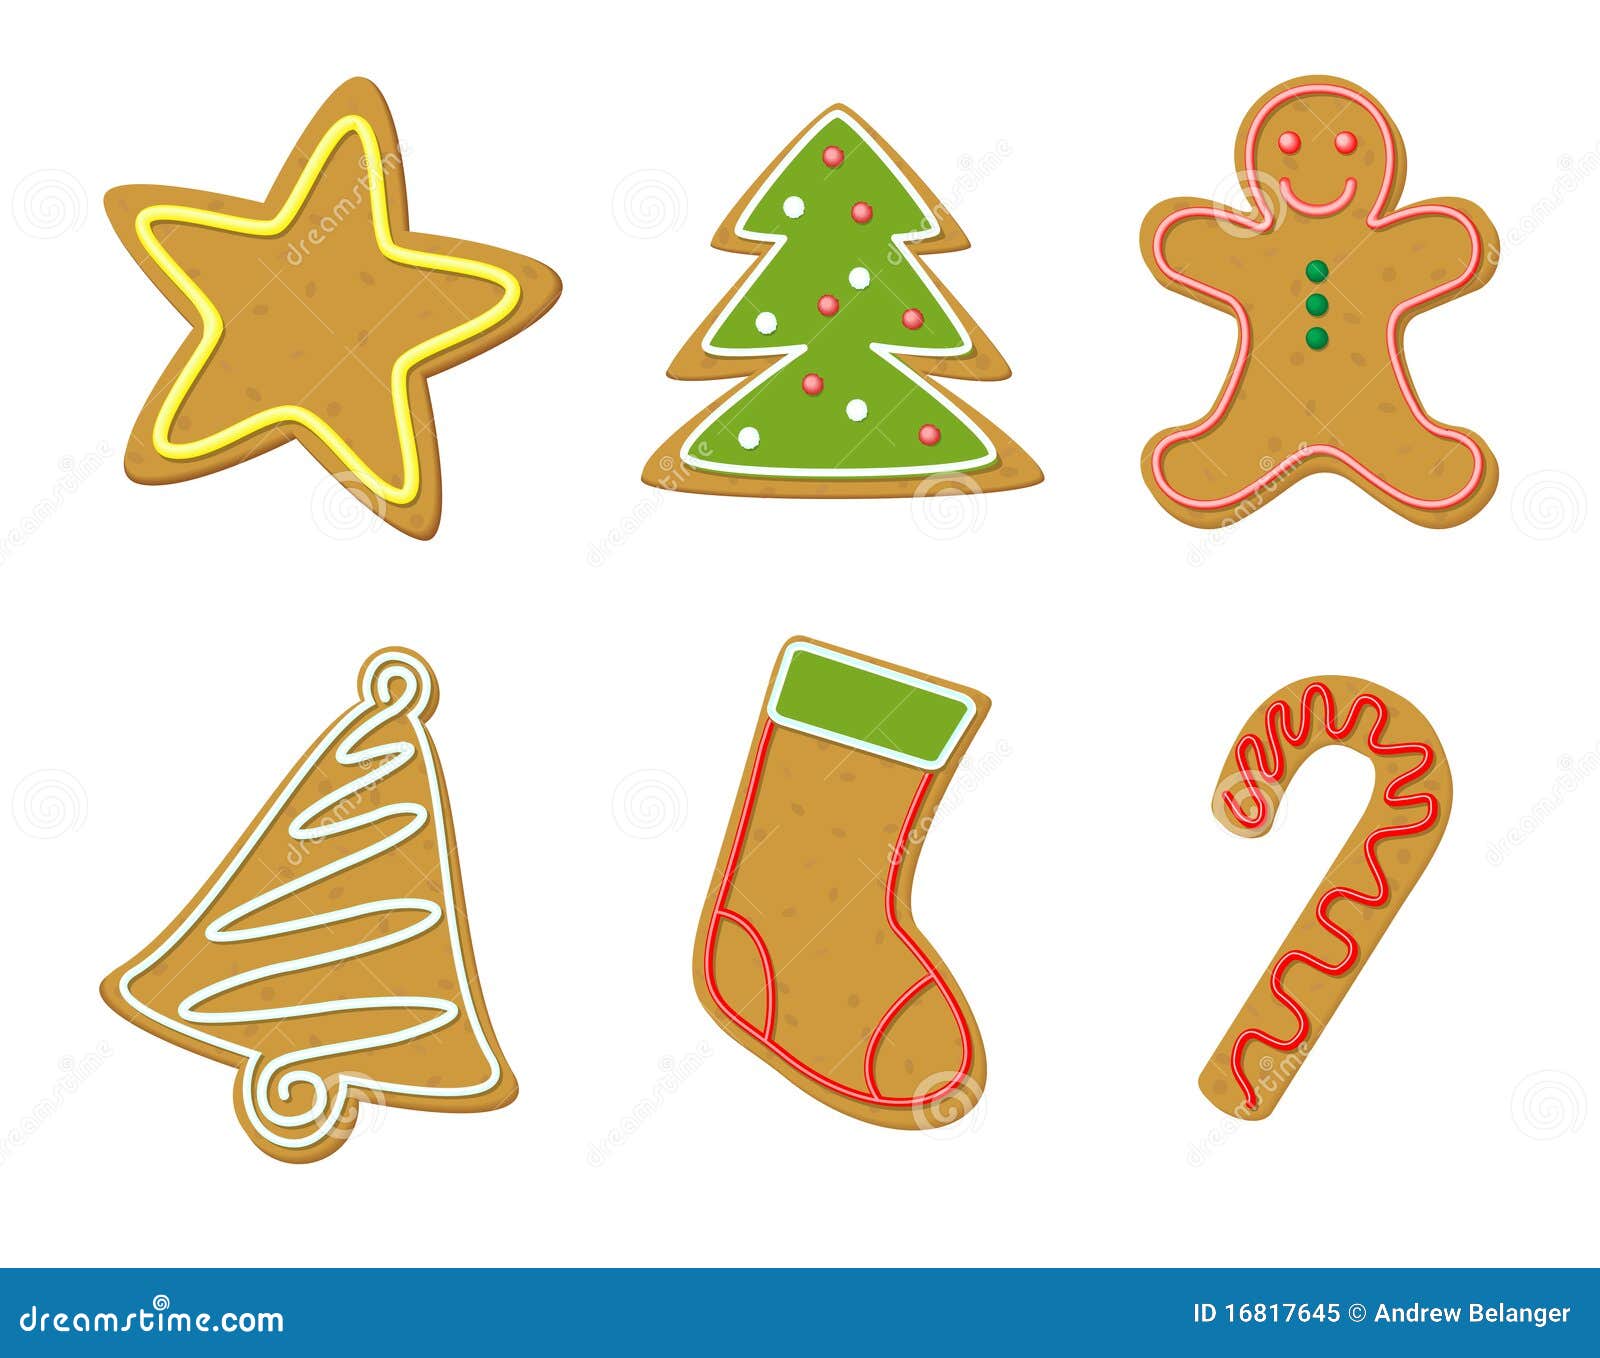 Christmas Cookies Shapes stock illustration. Illustration of outline